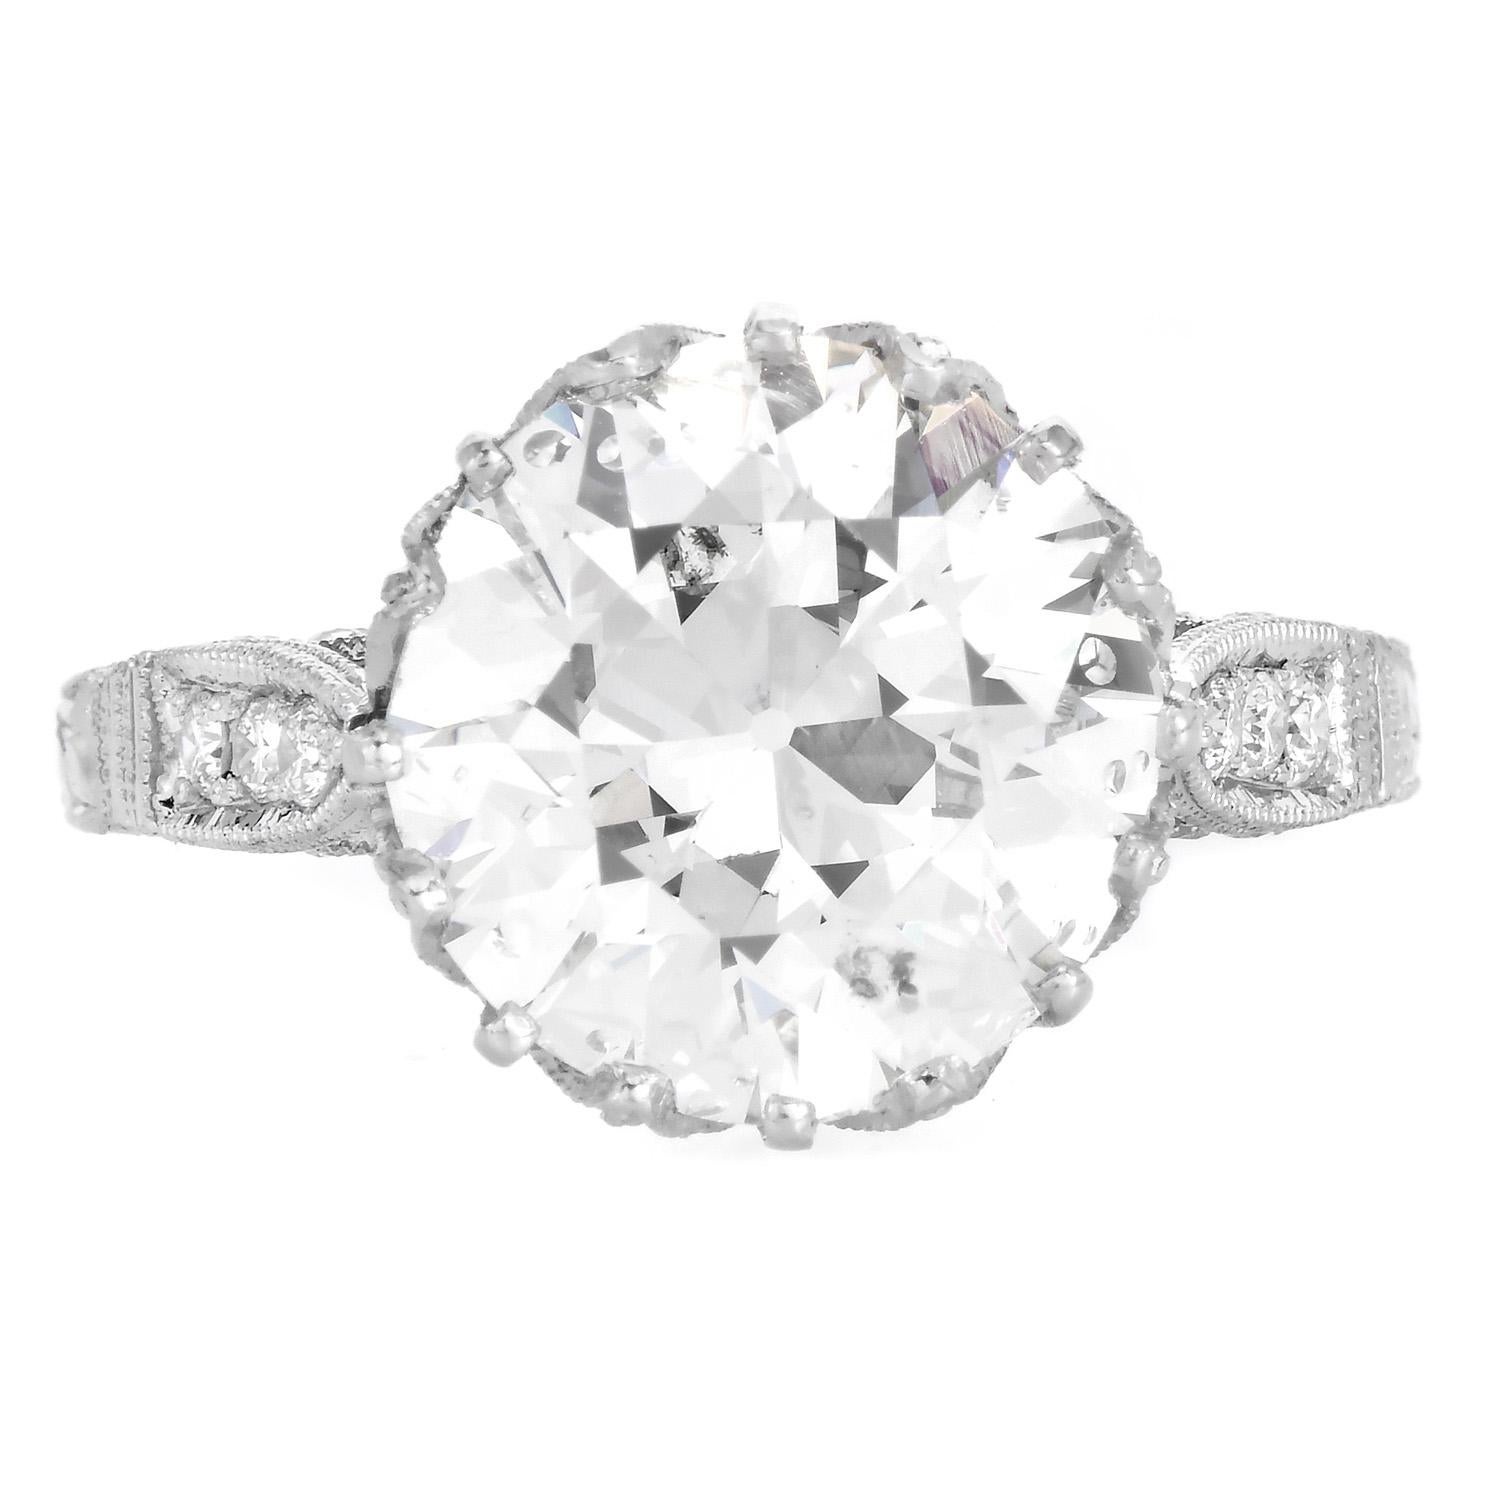 Re-live the past with this astonishing European-cut diamond 18k white gold  Engagement Ring.

The Center is showcased with a stunning 4.70-carat Round European cut diamond full of sparkle, set in prongs, J color, and SI2 clarity ( very clean